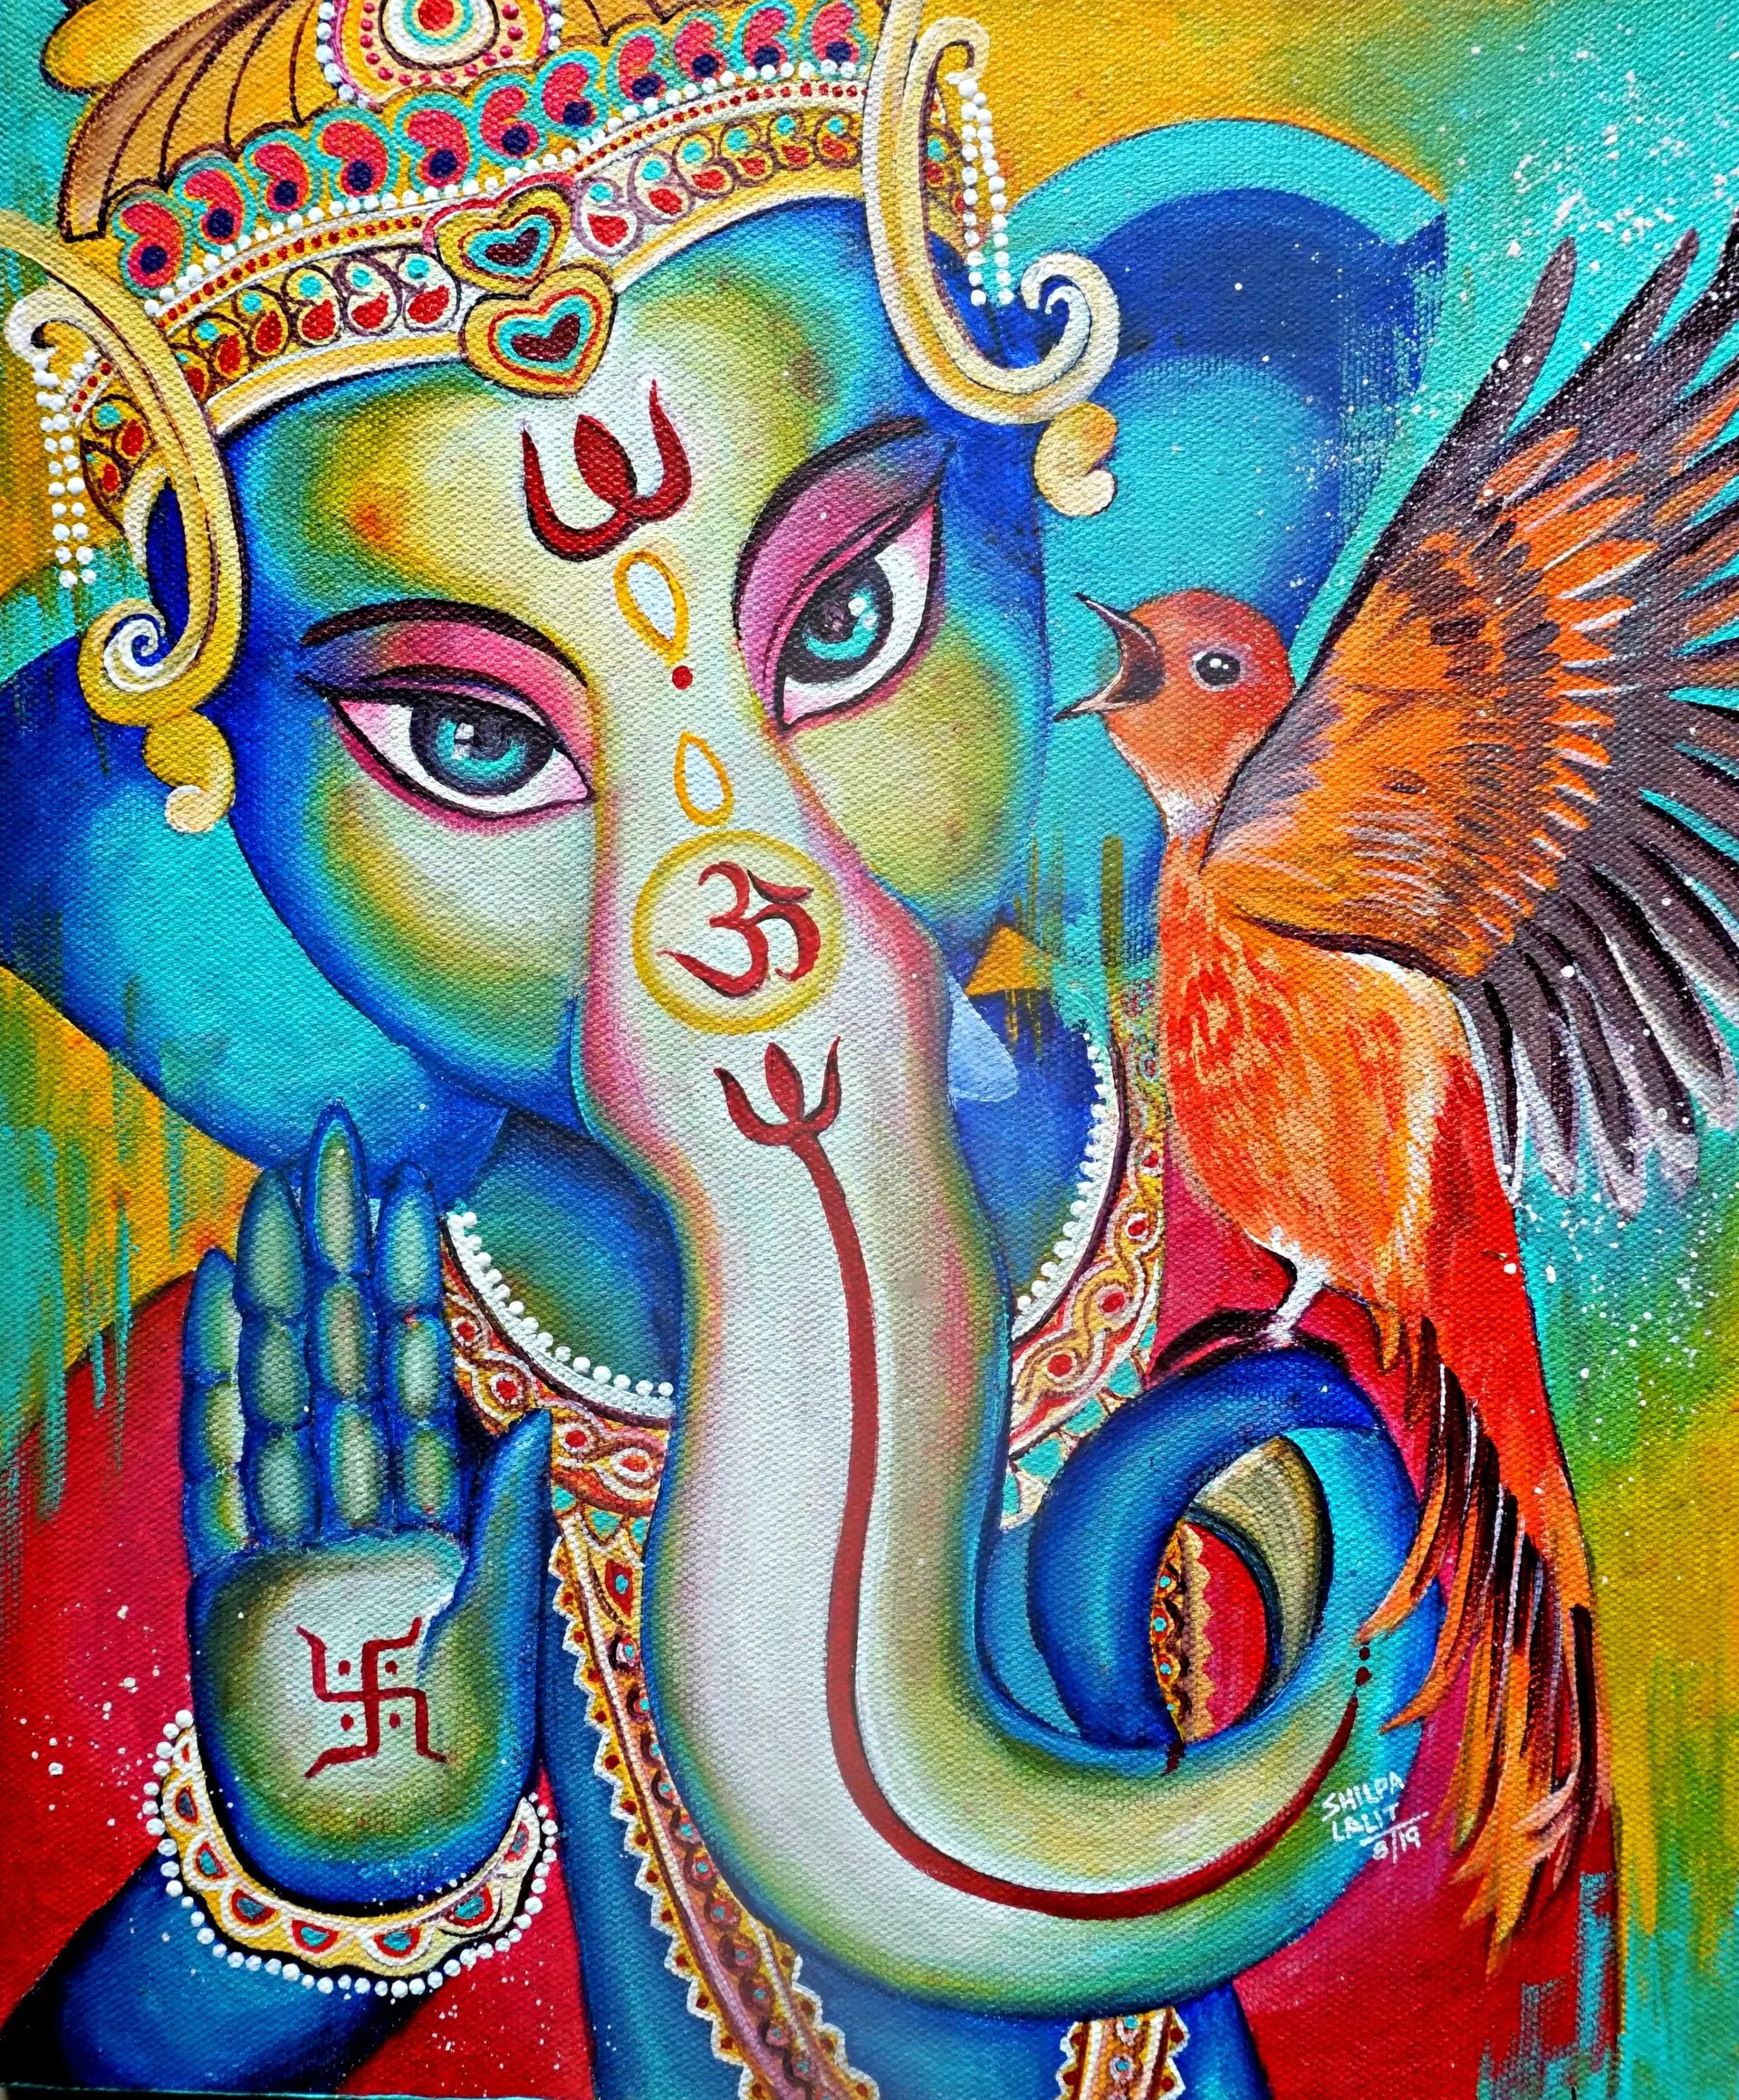 Learn to Paint the Majestic Lord Ganesha with the Red Bird - Acrylic Painting Workshop